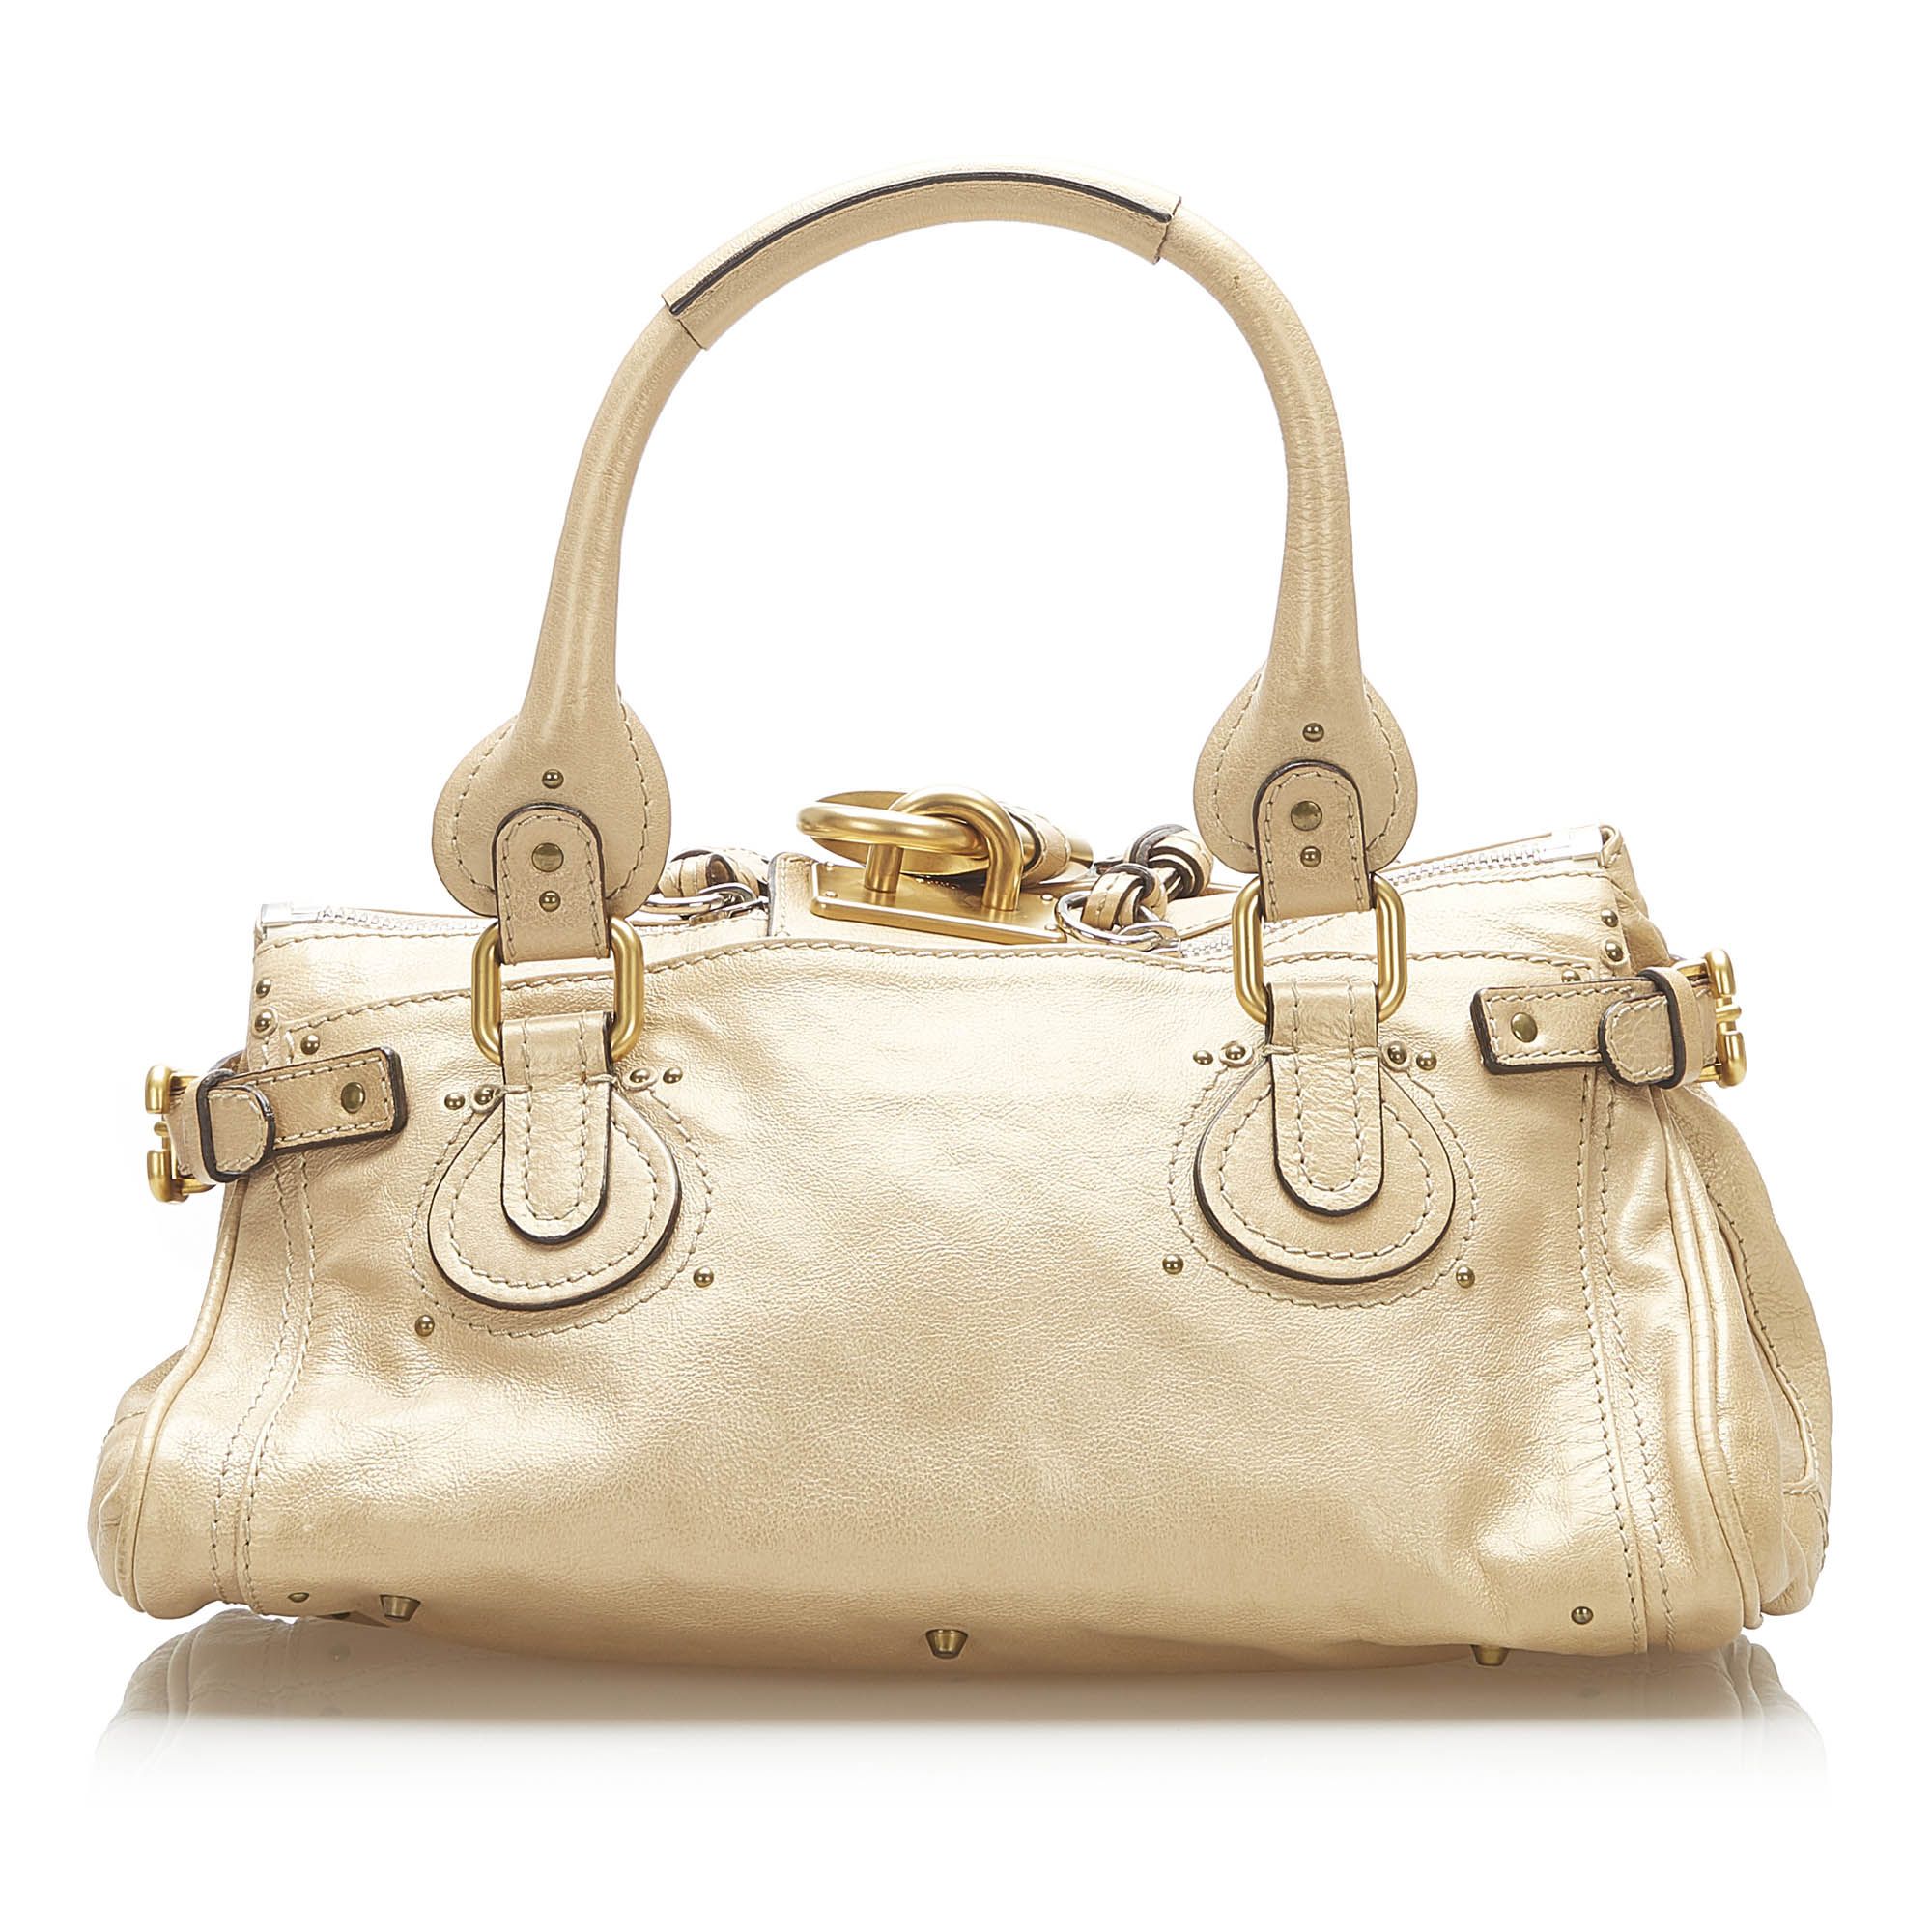 VINTAGE. RRP AS NEW. The Paddington handbag features a leather body, a rolled leather handles, a gold-tone padlock detail, a top zip closure, and an interior zip pocket.Exterior back is discolored. Exterior bottom is discolored. Exterior corners is discolored. Exterior front is discolored. Exterior handle is discolored. Exterior side is discolored. Studs is tarnished. Zipper is tarnished.

Dimensions:
Length 19cm
Width 35.5cm
Depth 16cm
Hand Drop 18cm
Shoulder Drop 17cm

Original Accessories: Dust Bag, Authenticity Card

Color: Brown x Beige
Material: Leather x Calf
Country of Origin: France
Boutique Reference: SSU94359K1342


Product Rating: GoodCondition